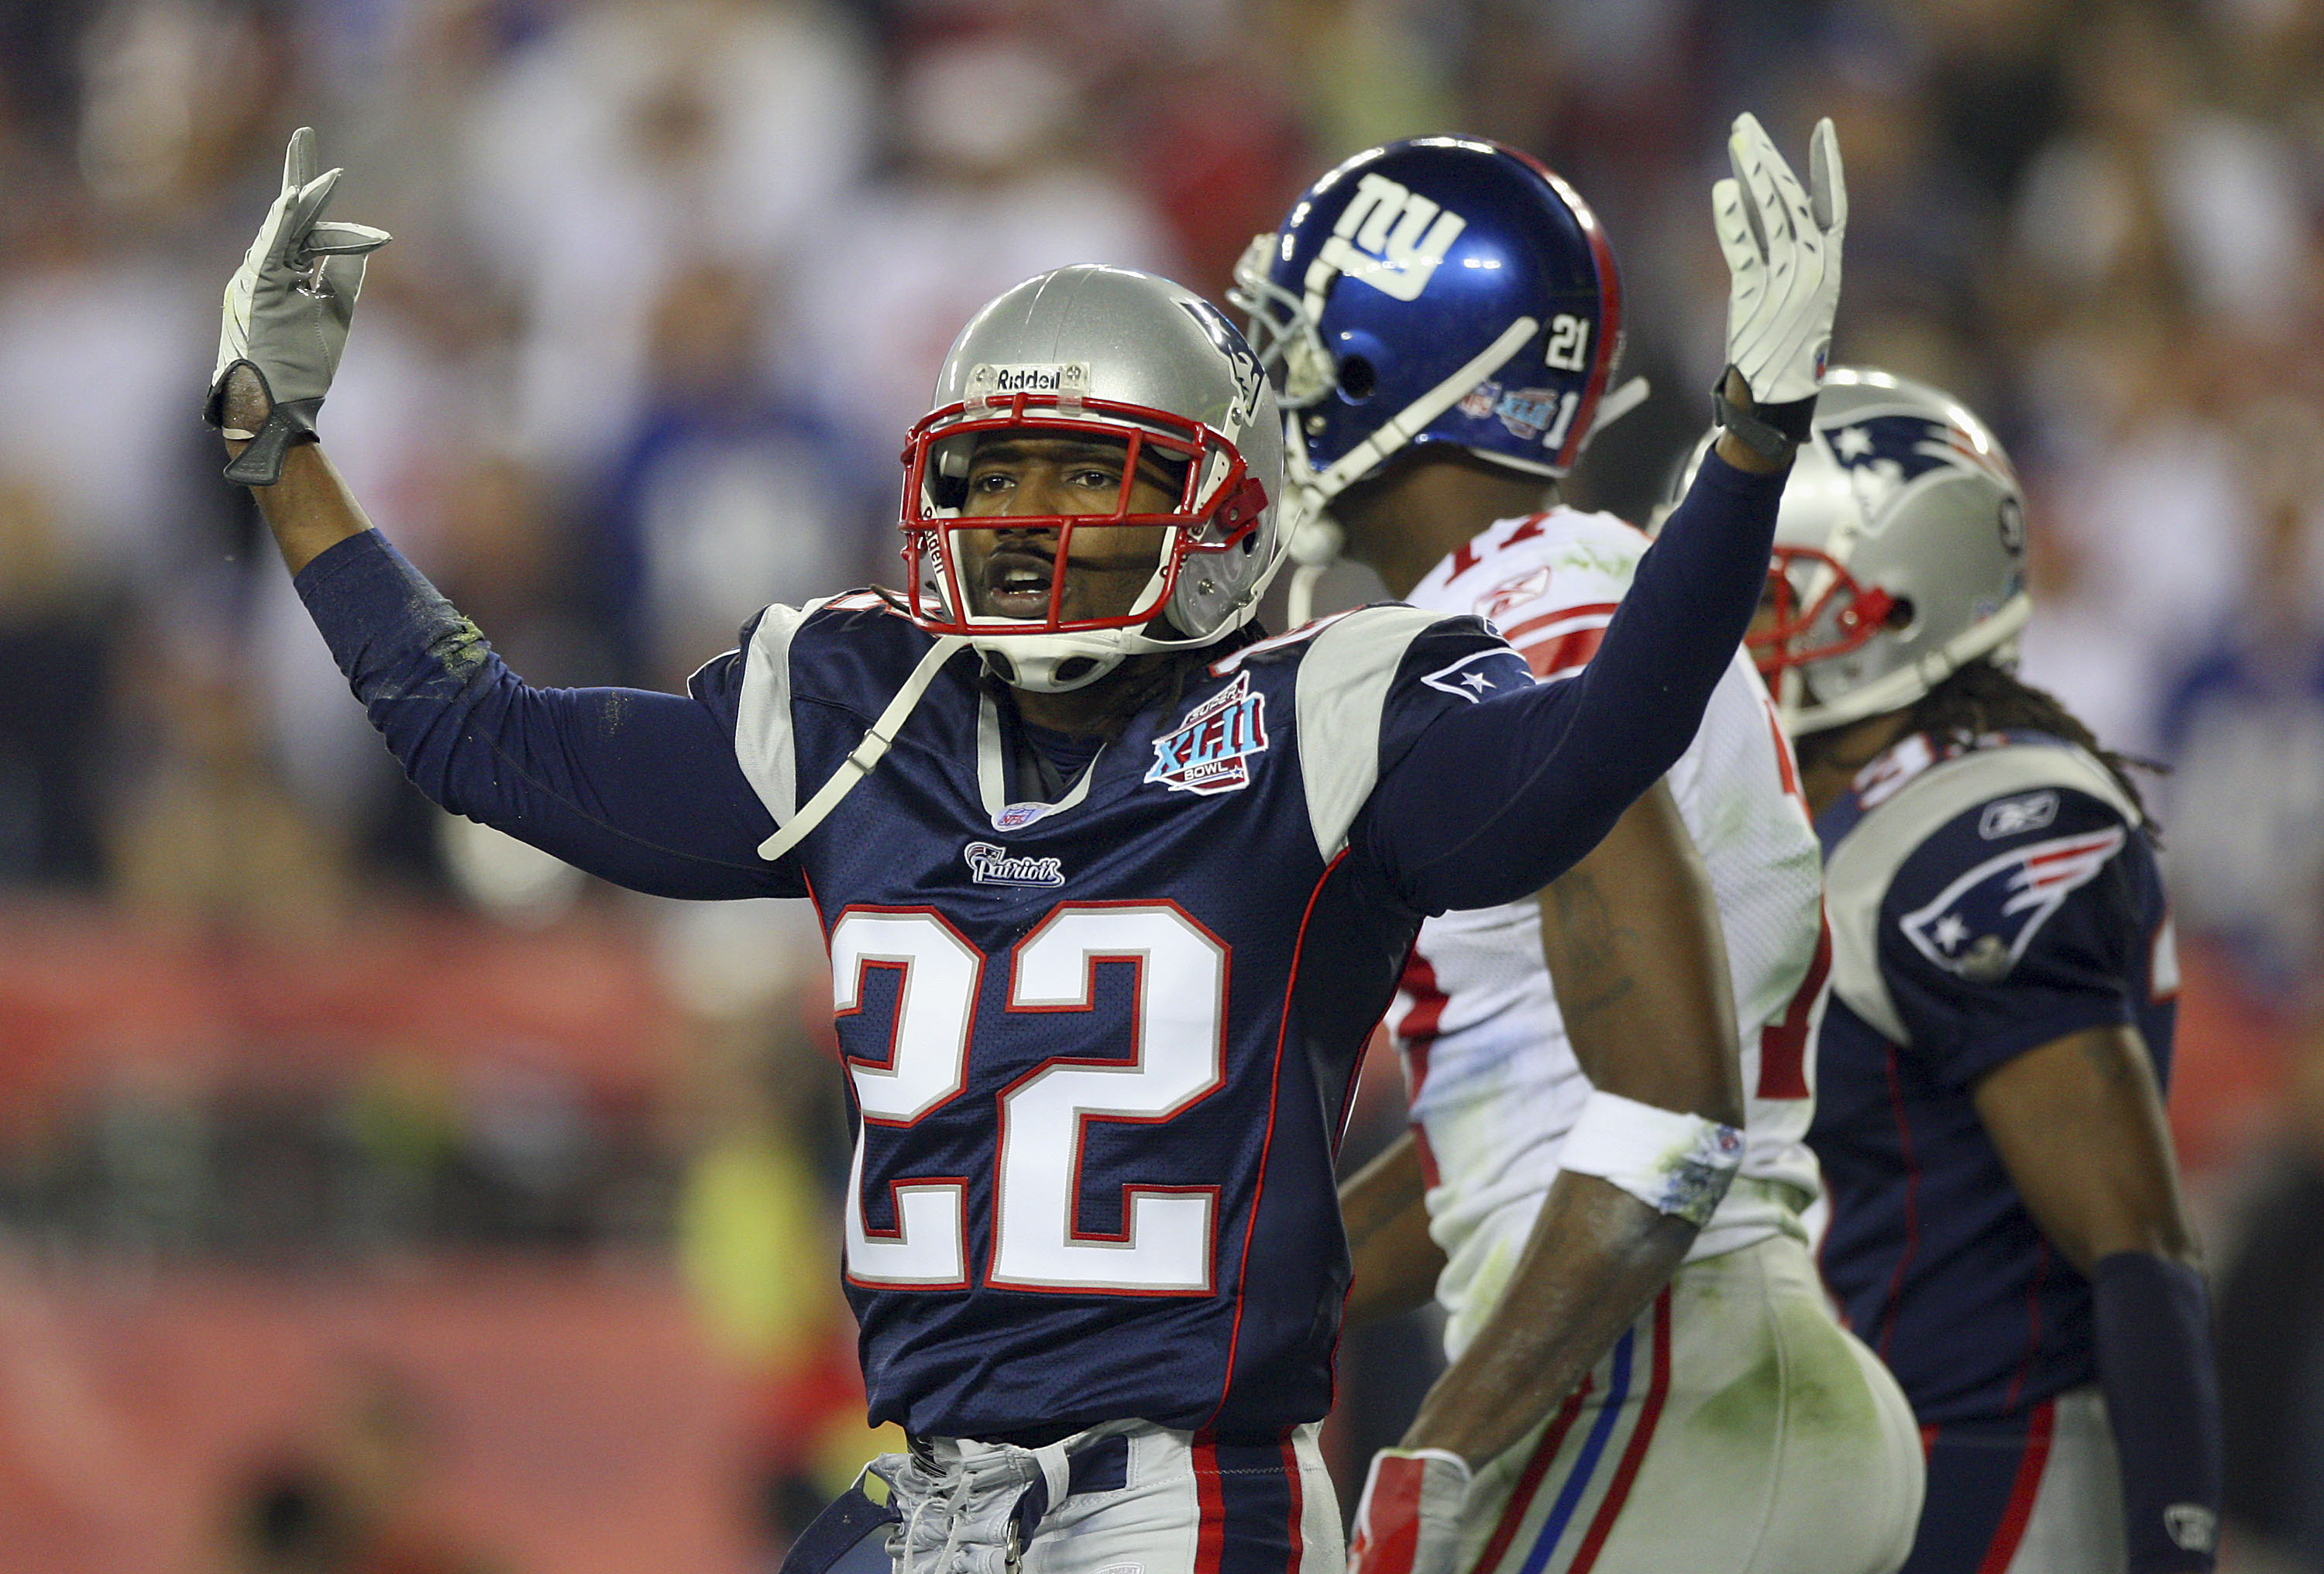 Cornerback Asante Samuel of the New England Patriots celebrates after breaking up a pass.